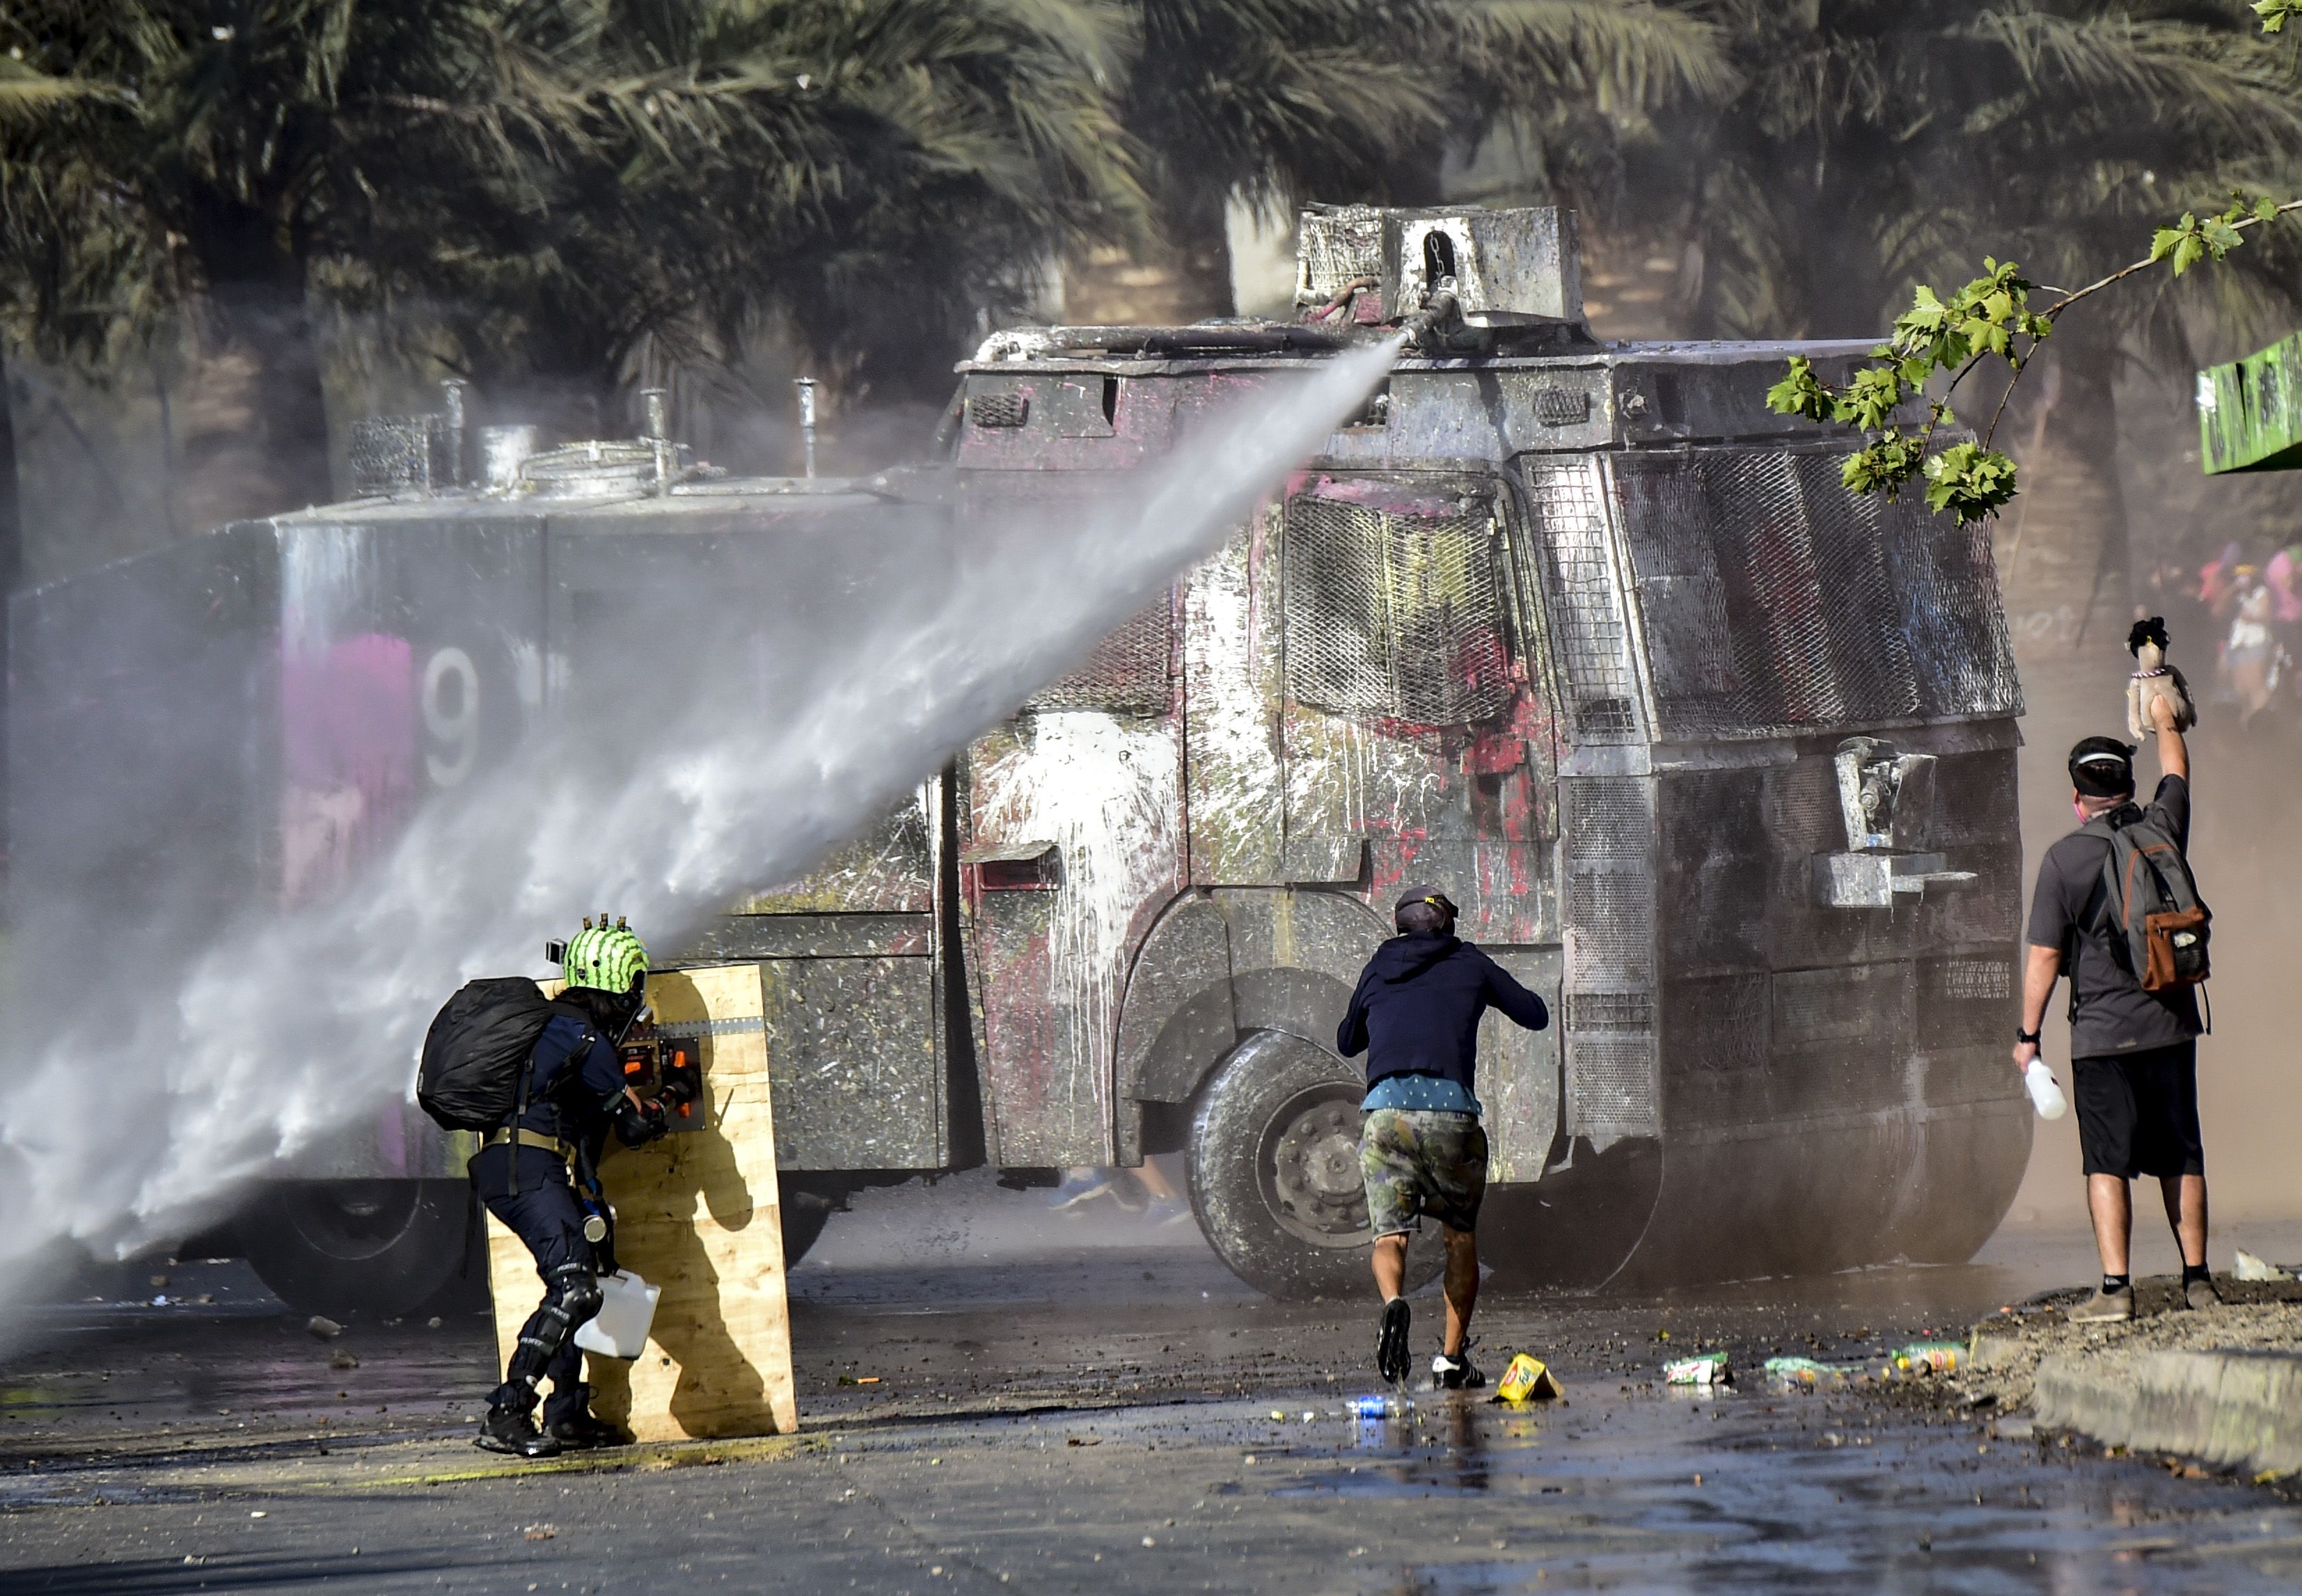 In this image, a truck sprays a water hose at a protestor who uses a plank of wood as a shield 